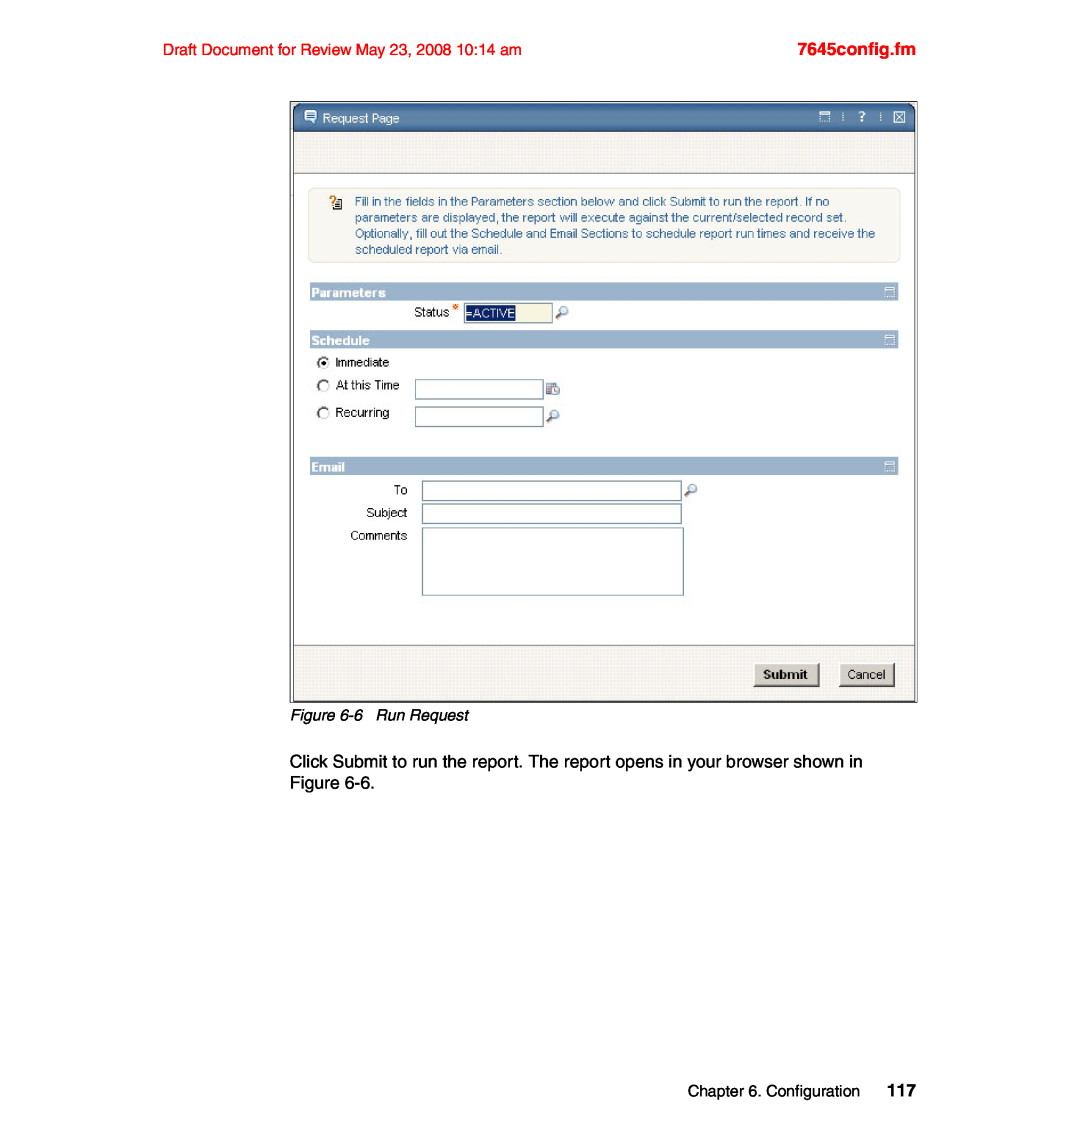 IBM SG24-7645-00 manual 7645config.fm, Draft Document for Review May 23, 2008 10:14 am, 6Run Request 